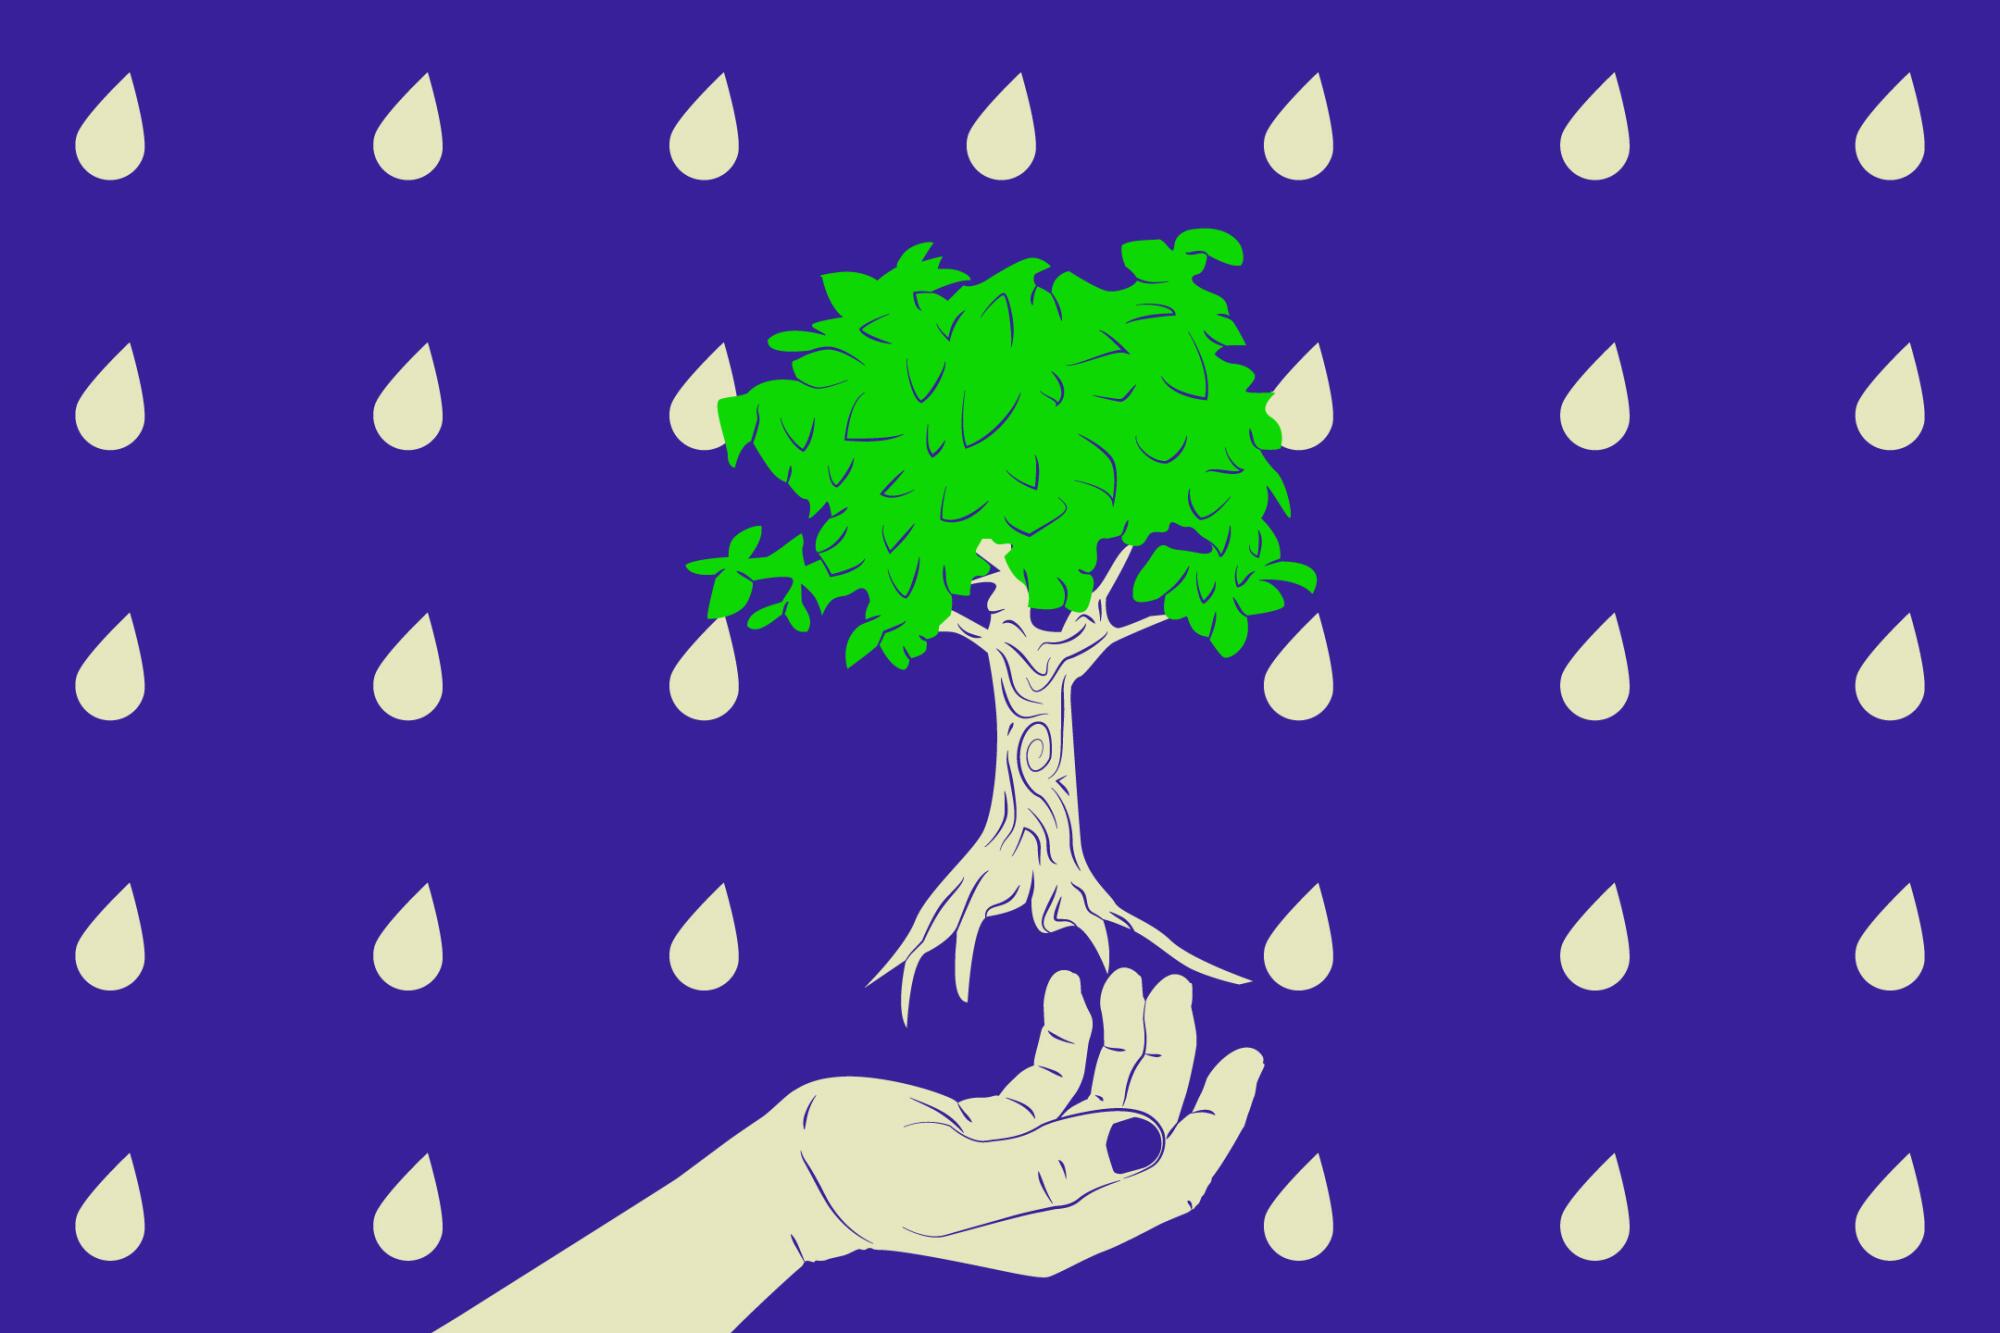 Illustration shows a tree over an outstretched hand, with water droplets in a pattern